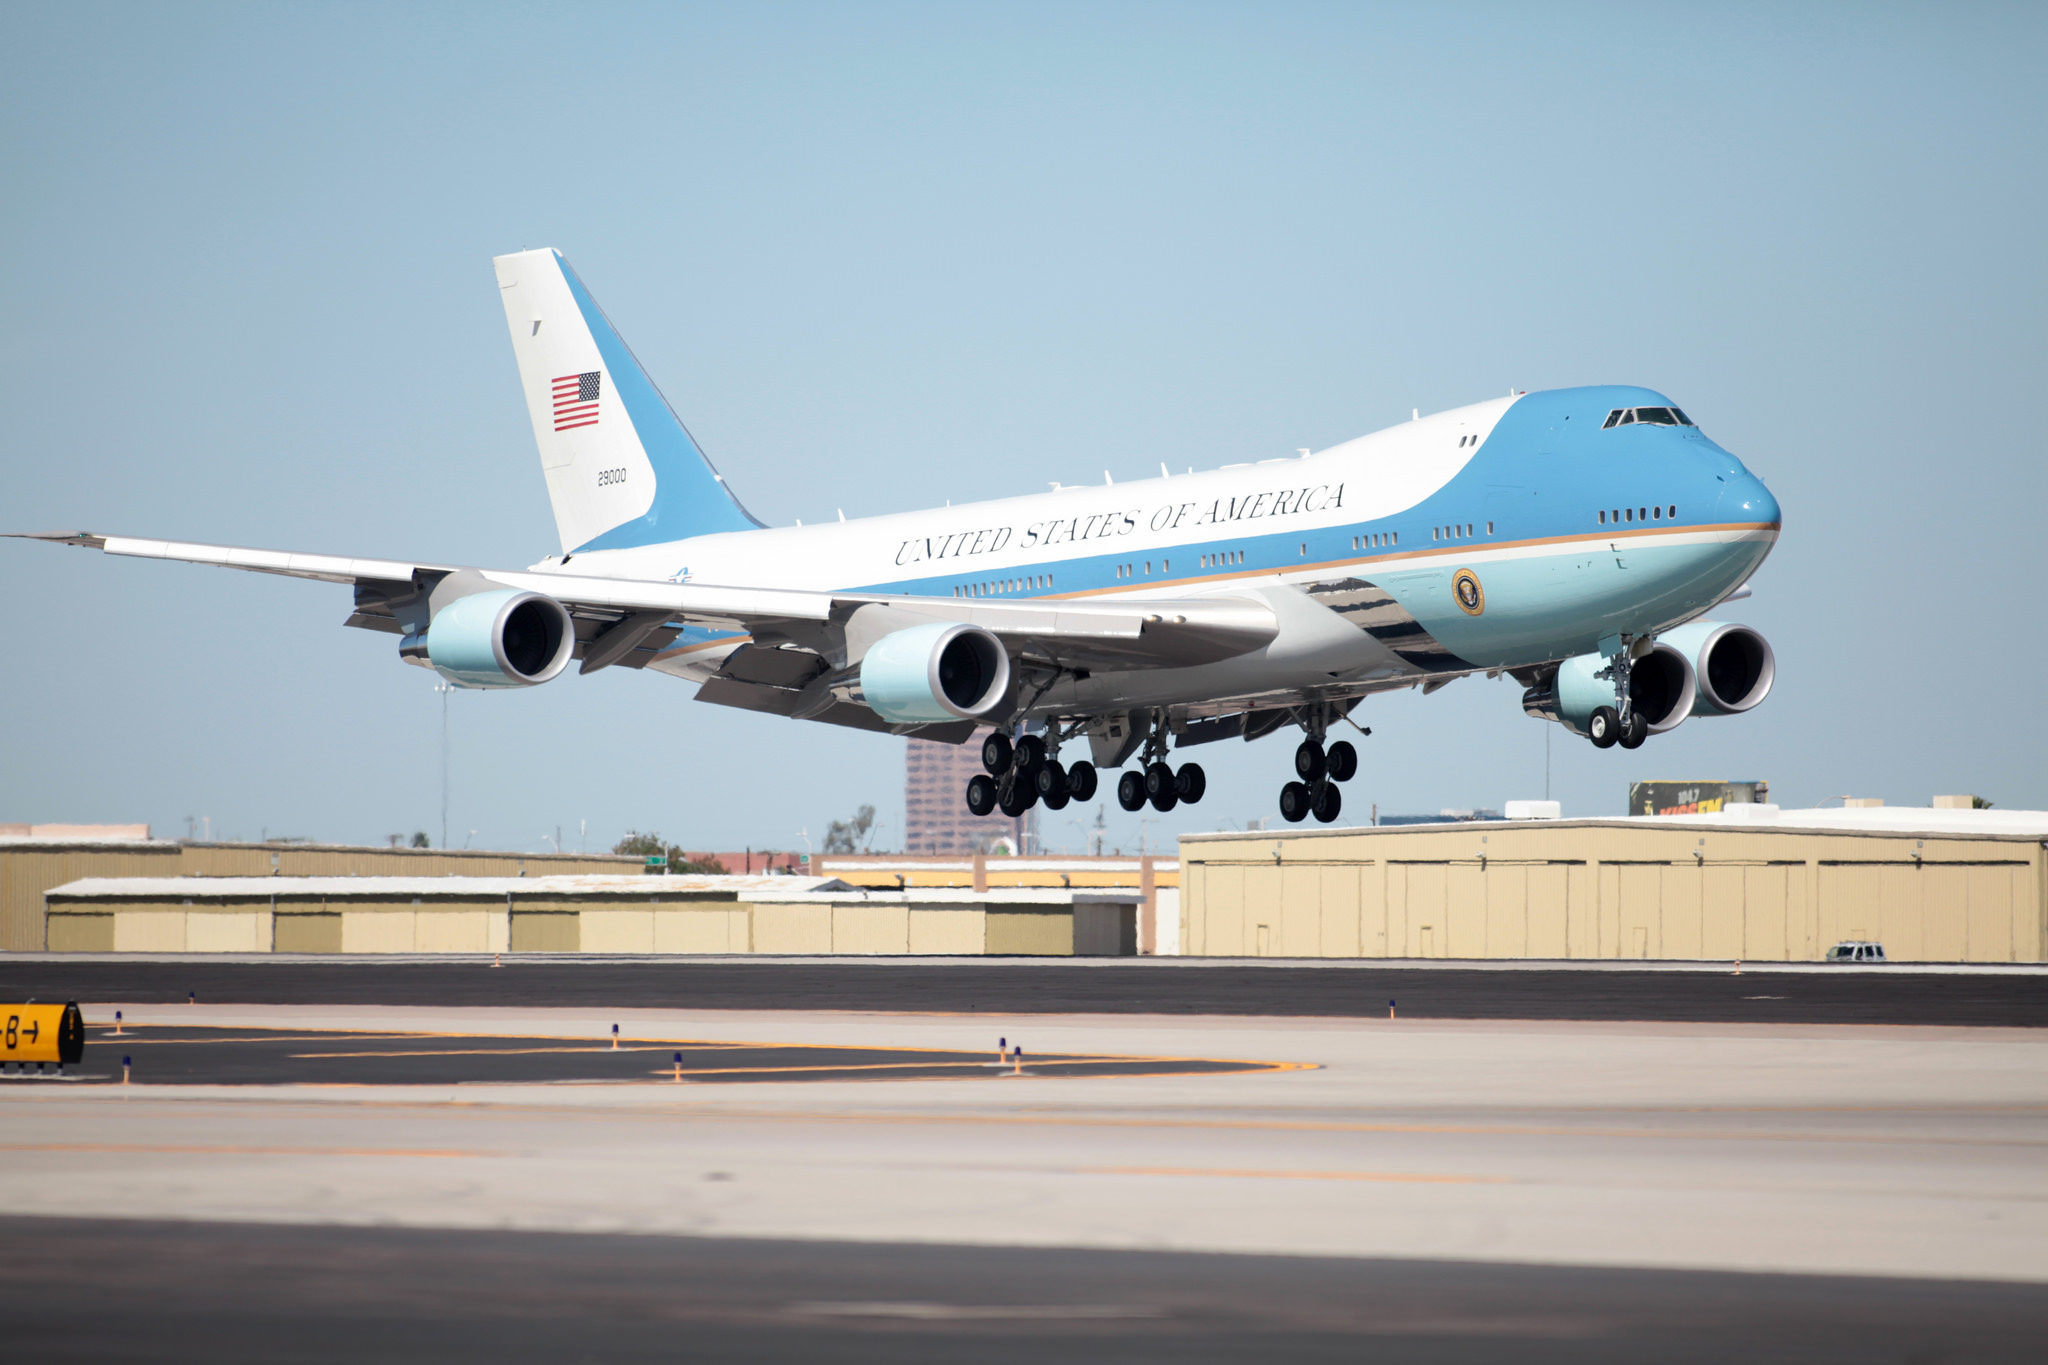 Air Force One